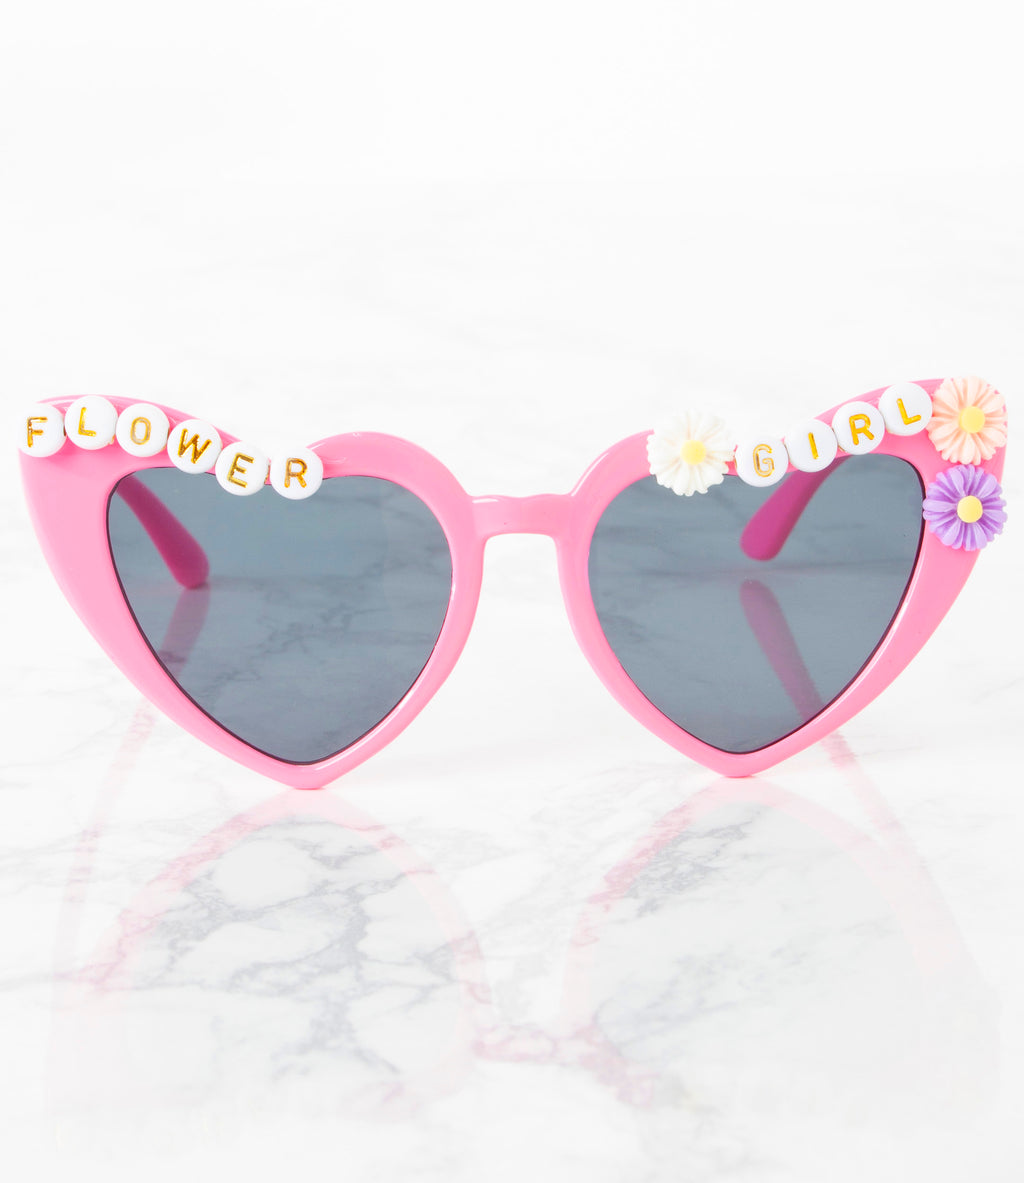 Wholesale Kid's Fashion Sunglasses - KP1433CP/FG - Pack of 12